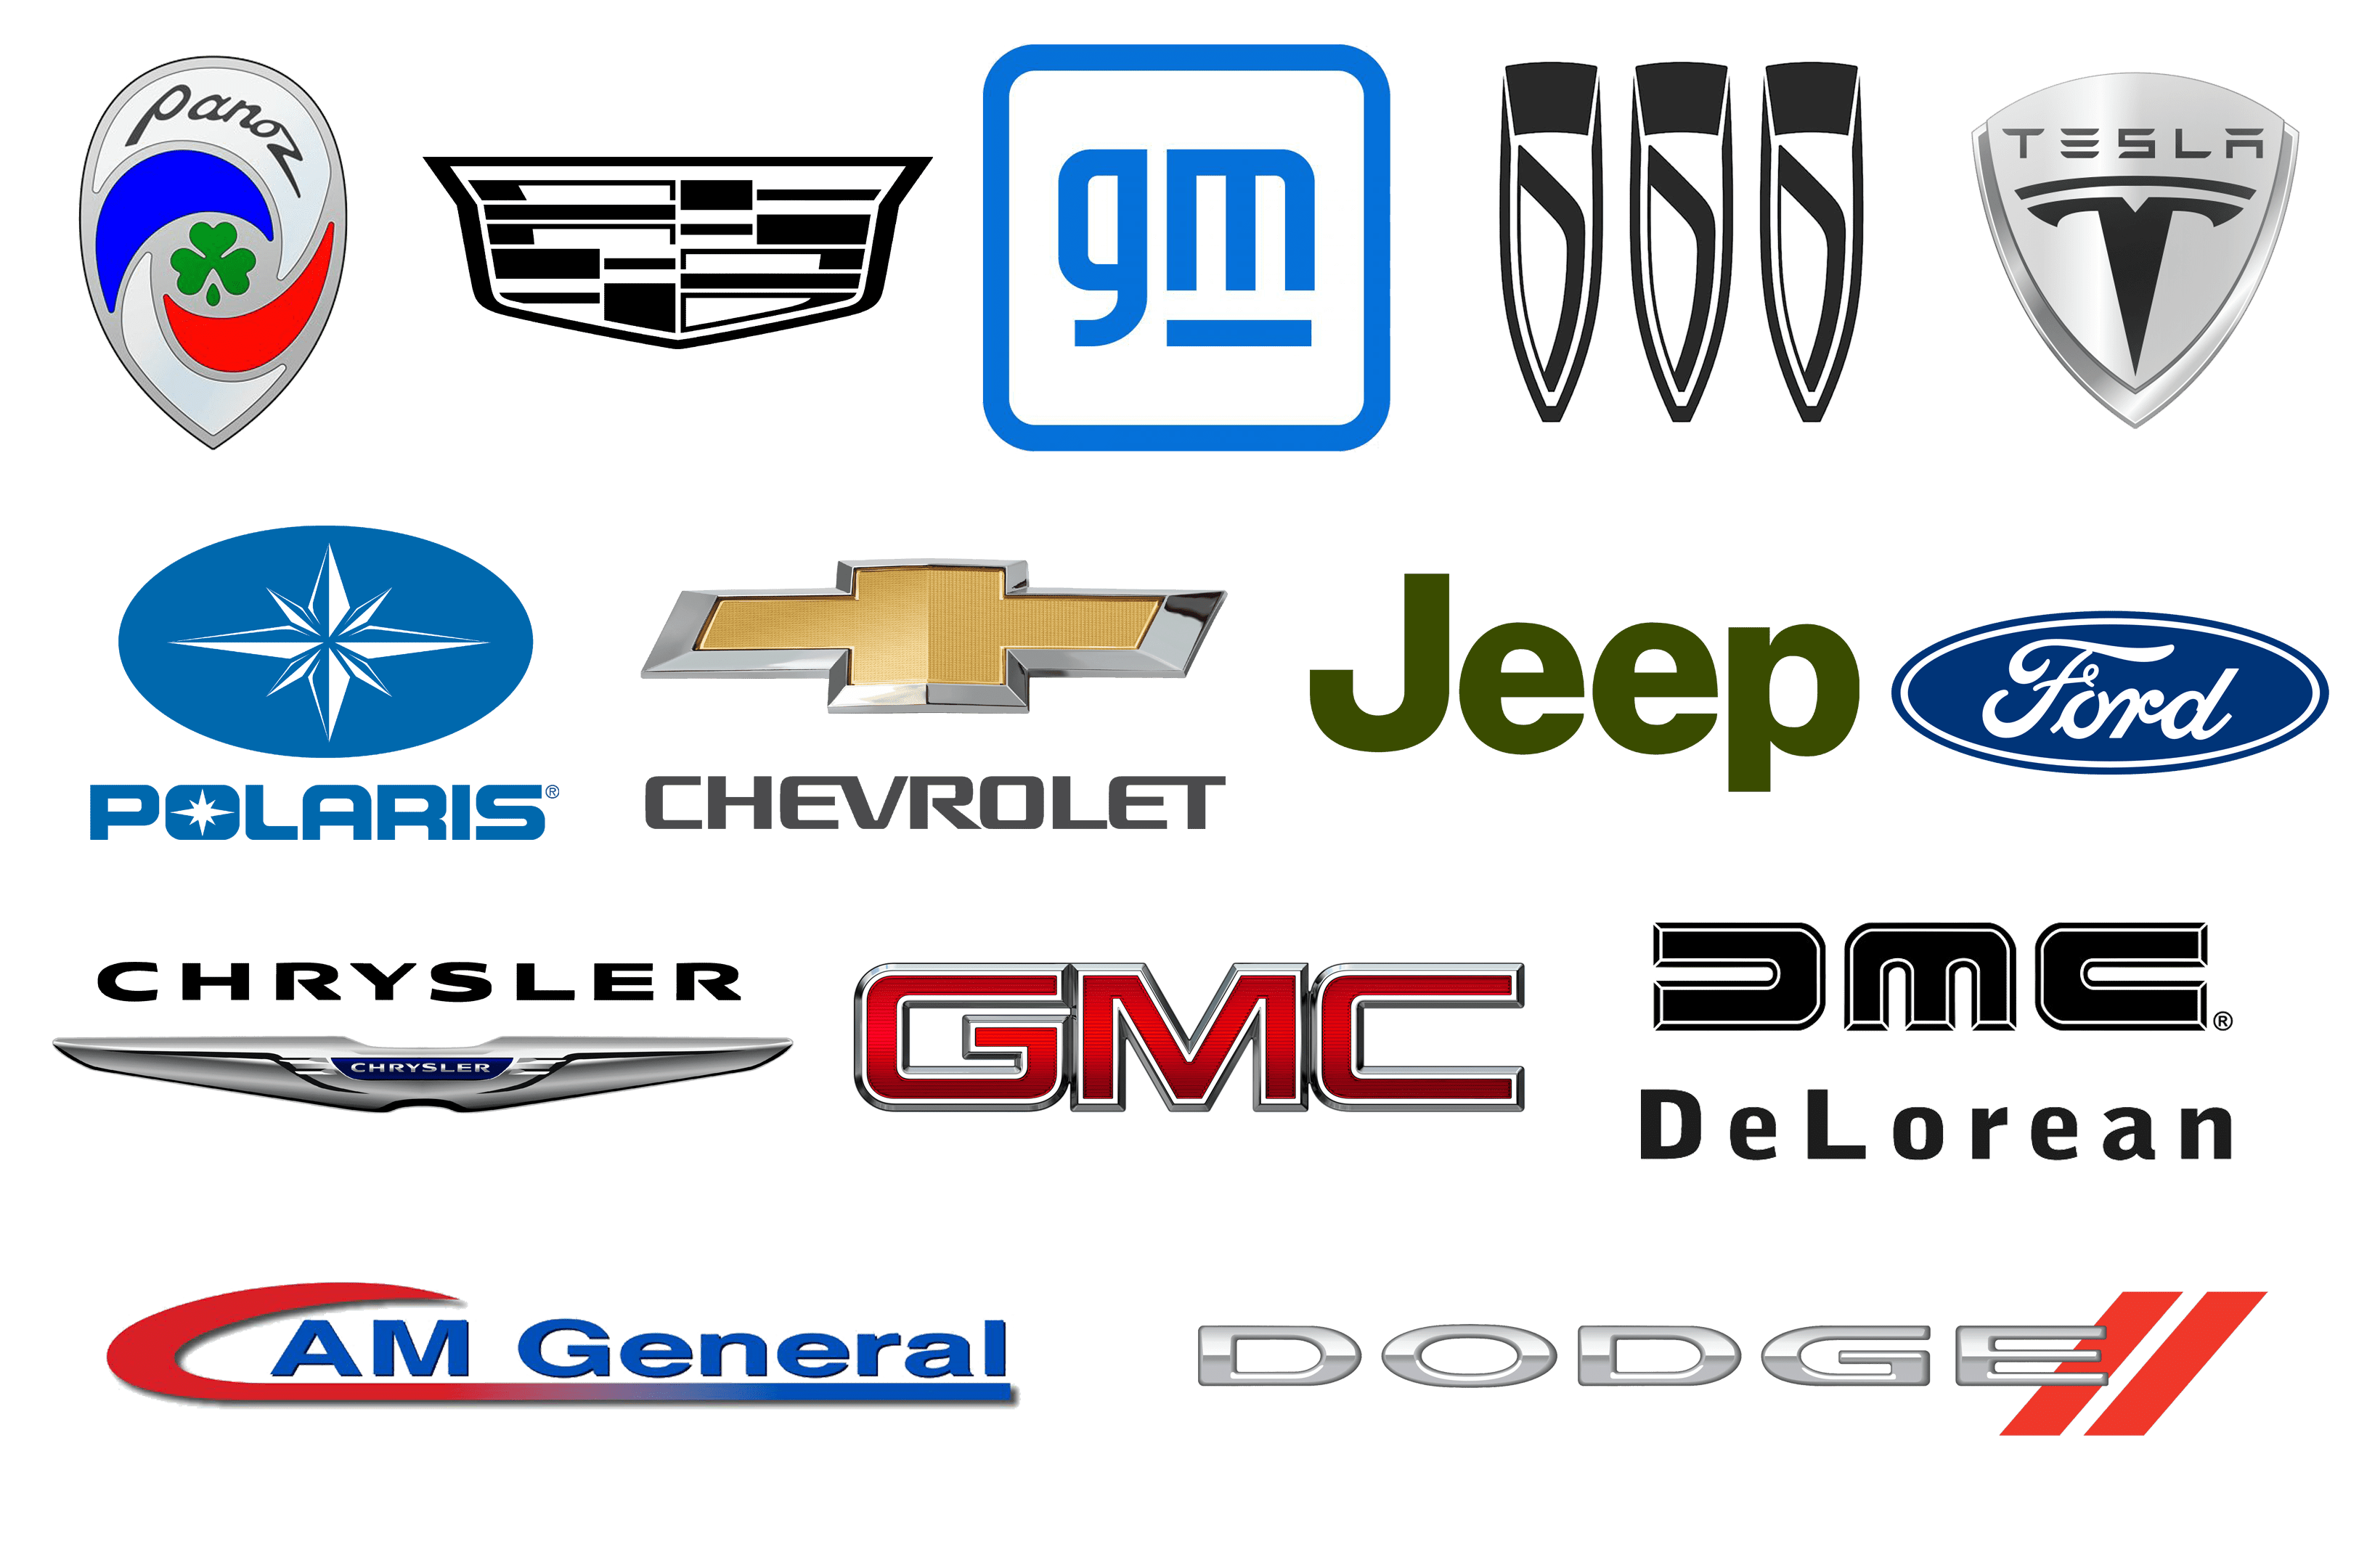 foreign car symbols and names